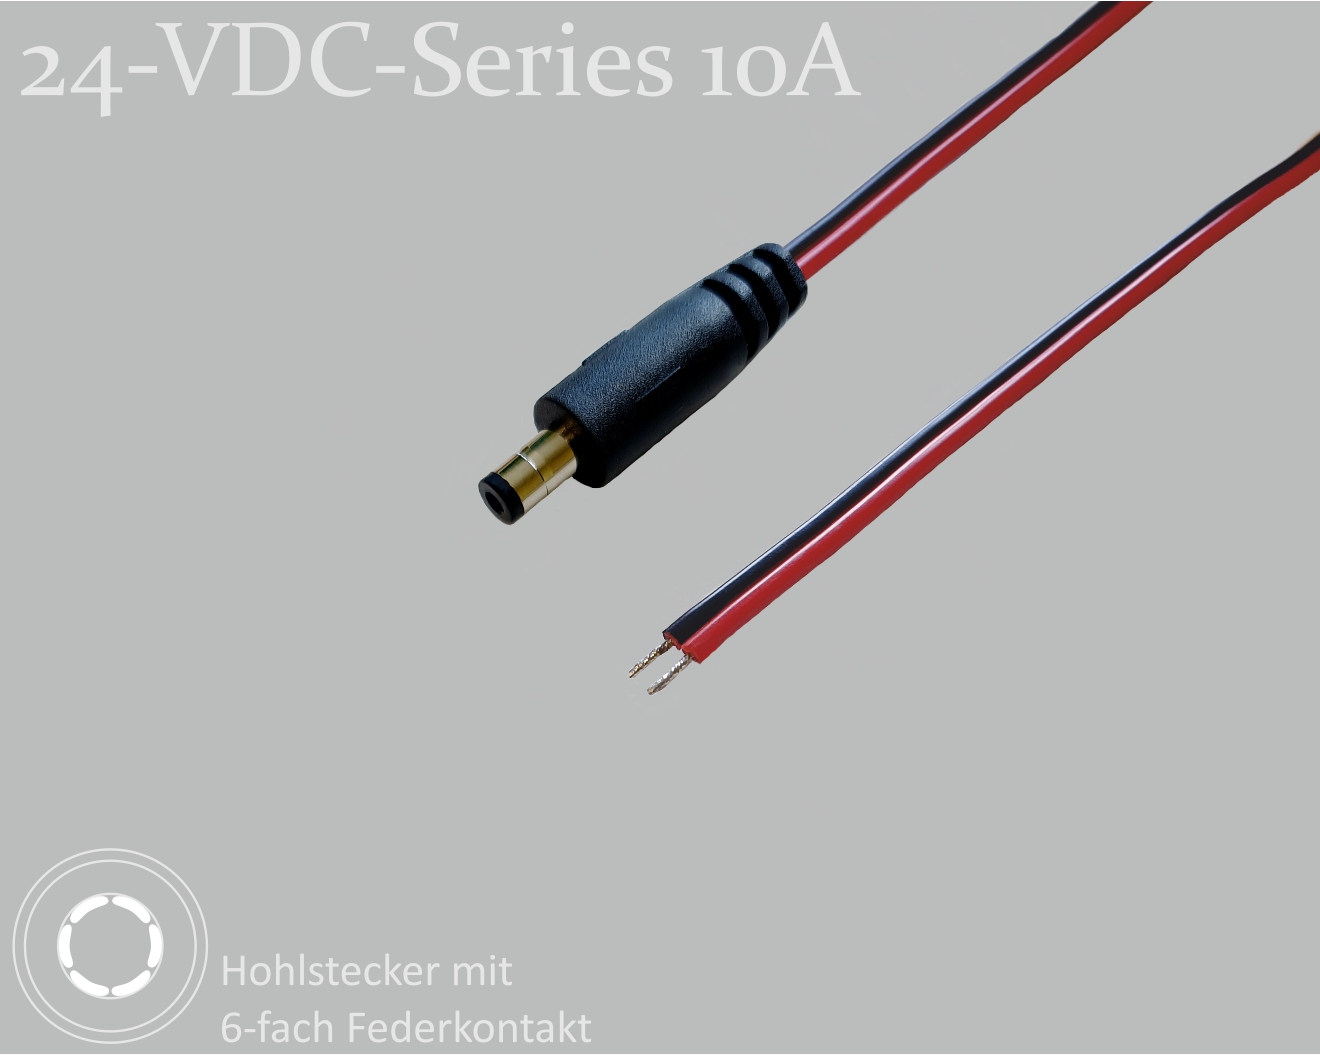 24-VDC-Series 10A, DC connection cable, DC plug with 4-spring contact 2.5x5.5x9.5mm, flat cable 2x0.75mm², red/black, tinned ends, 0.75m